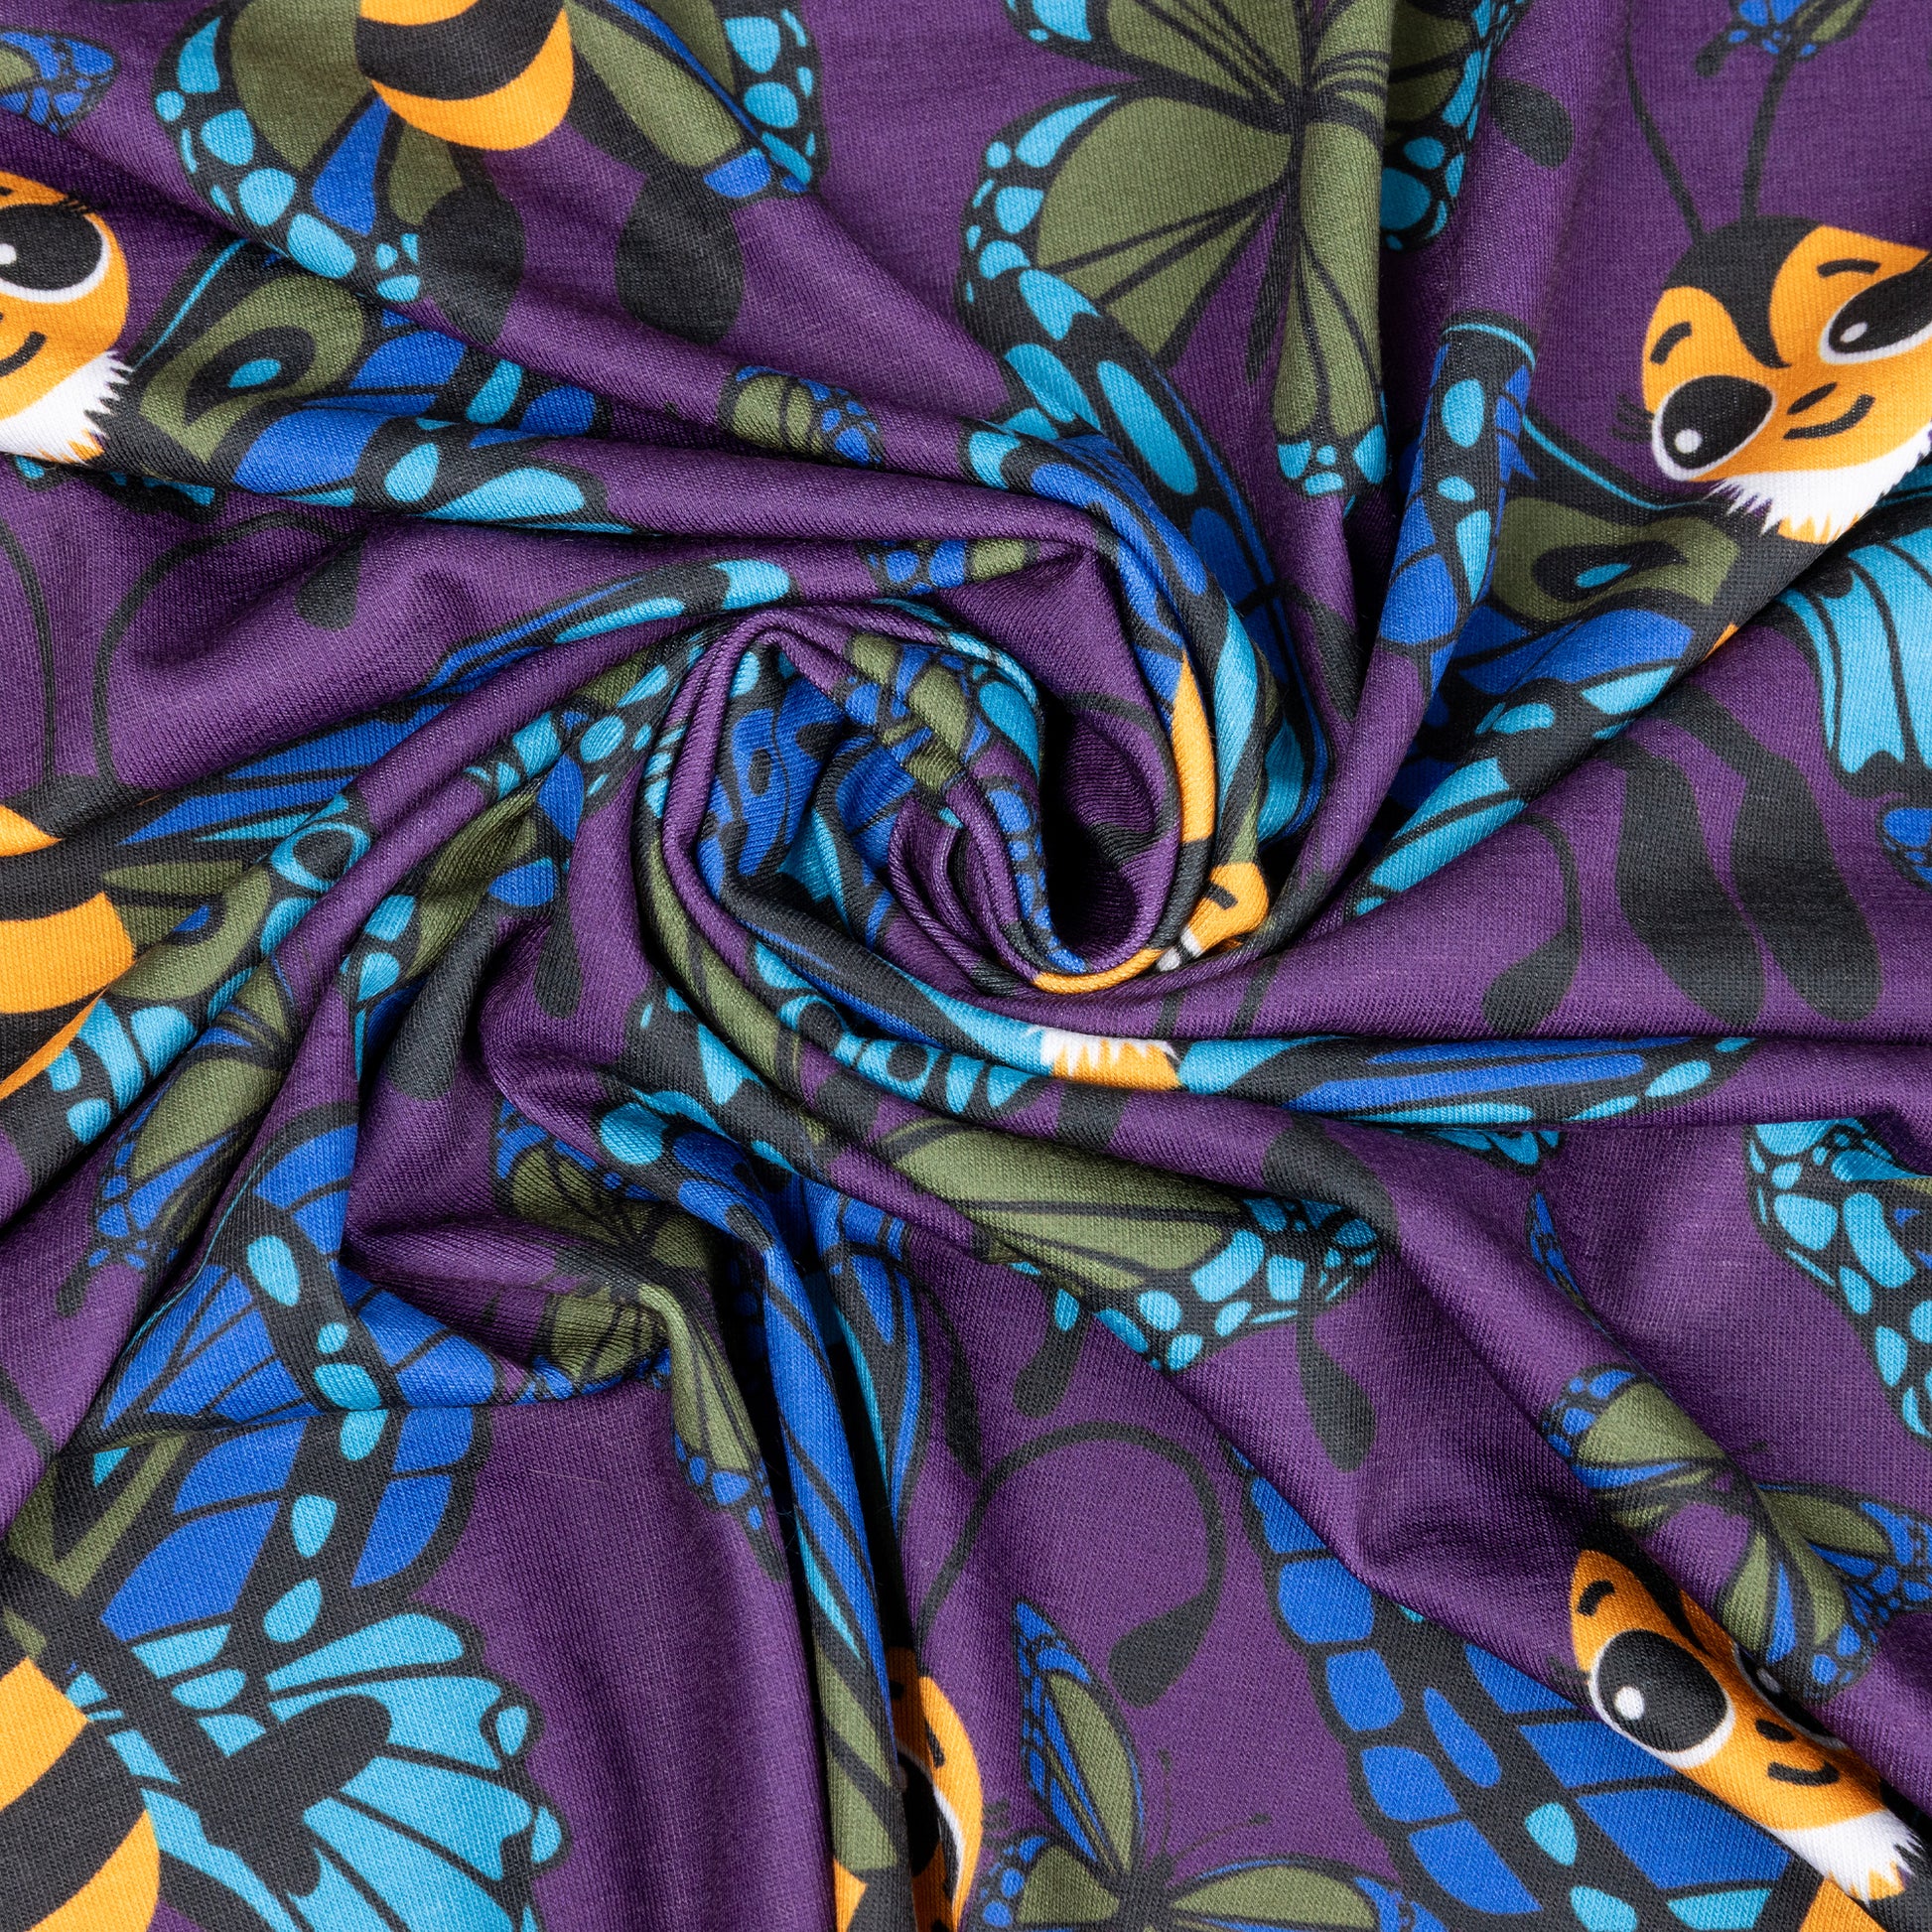 A swirl of fabric showing cute cartoon bees with butterfly wings. The bees are yellow and black with eyelashes, their wings are blue and green. They are against a purple background with various sized butterflies too.